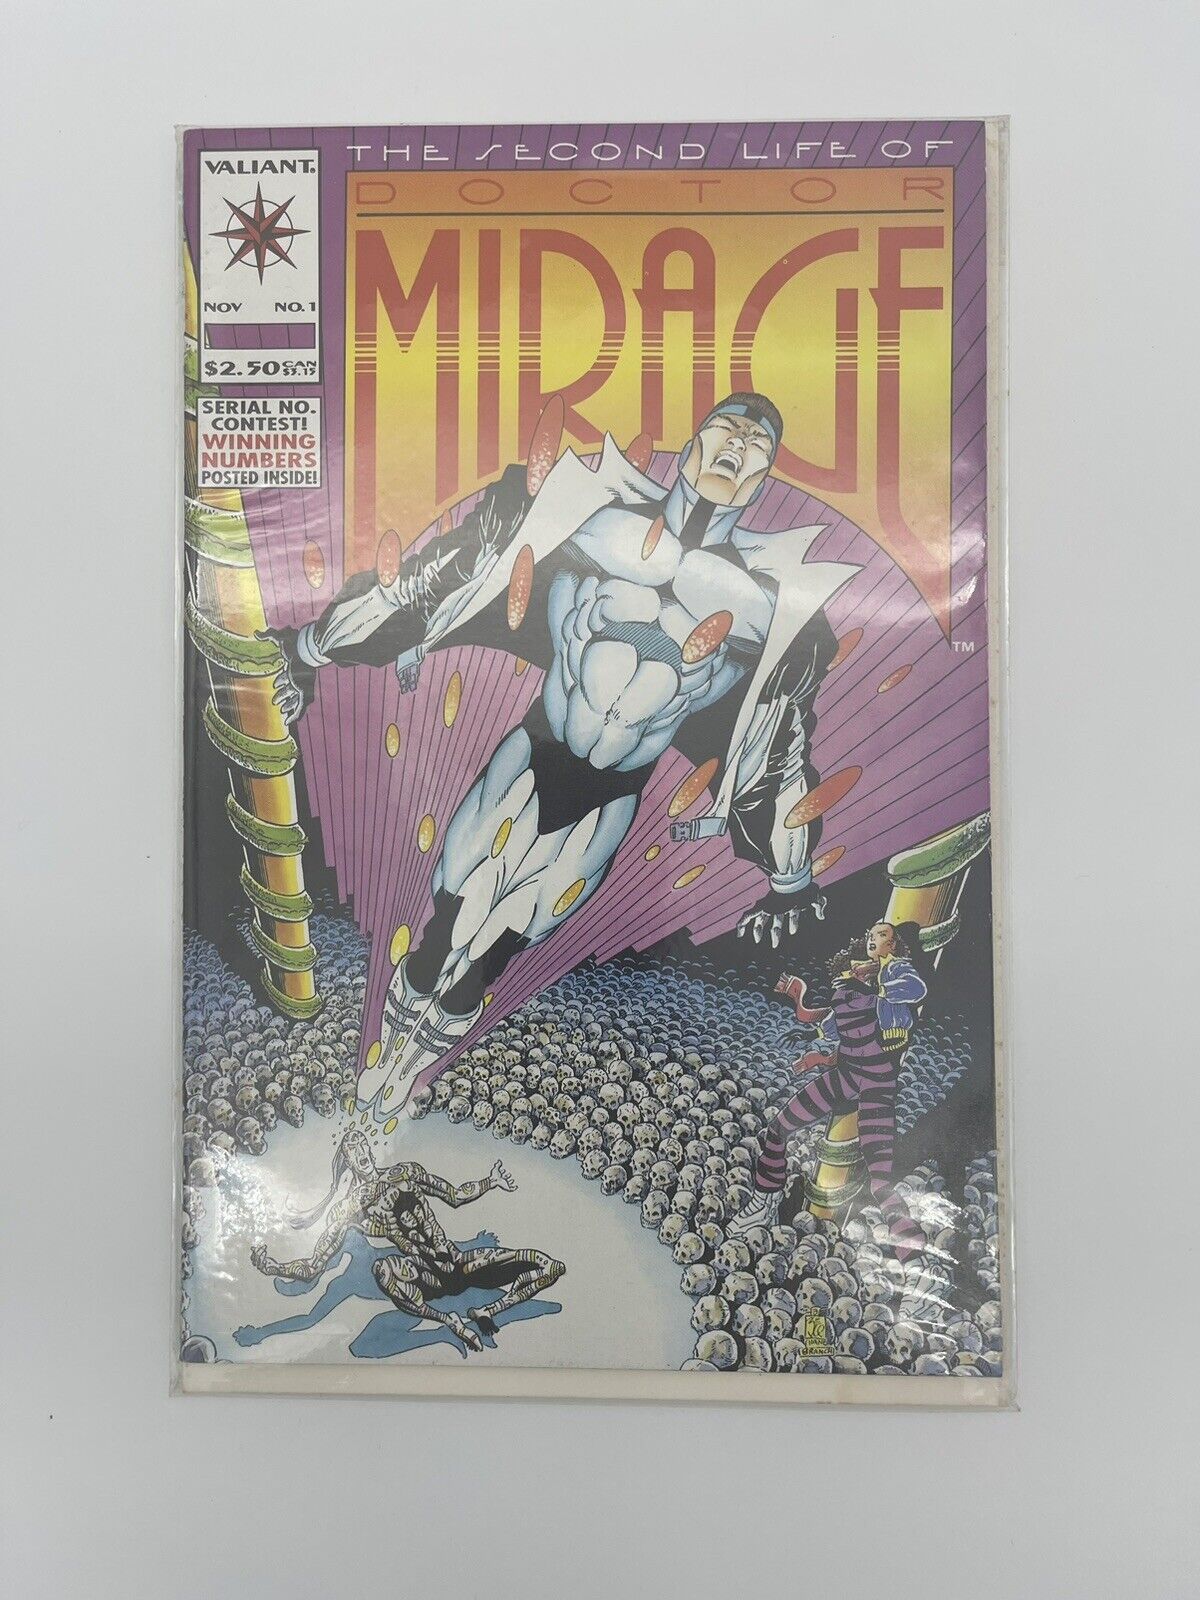 Valiant Comics The Second Life of Doctor Mirage #1 1993, Excellent Condition